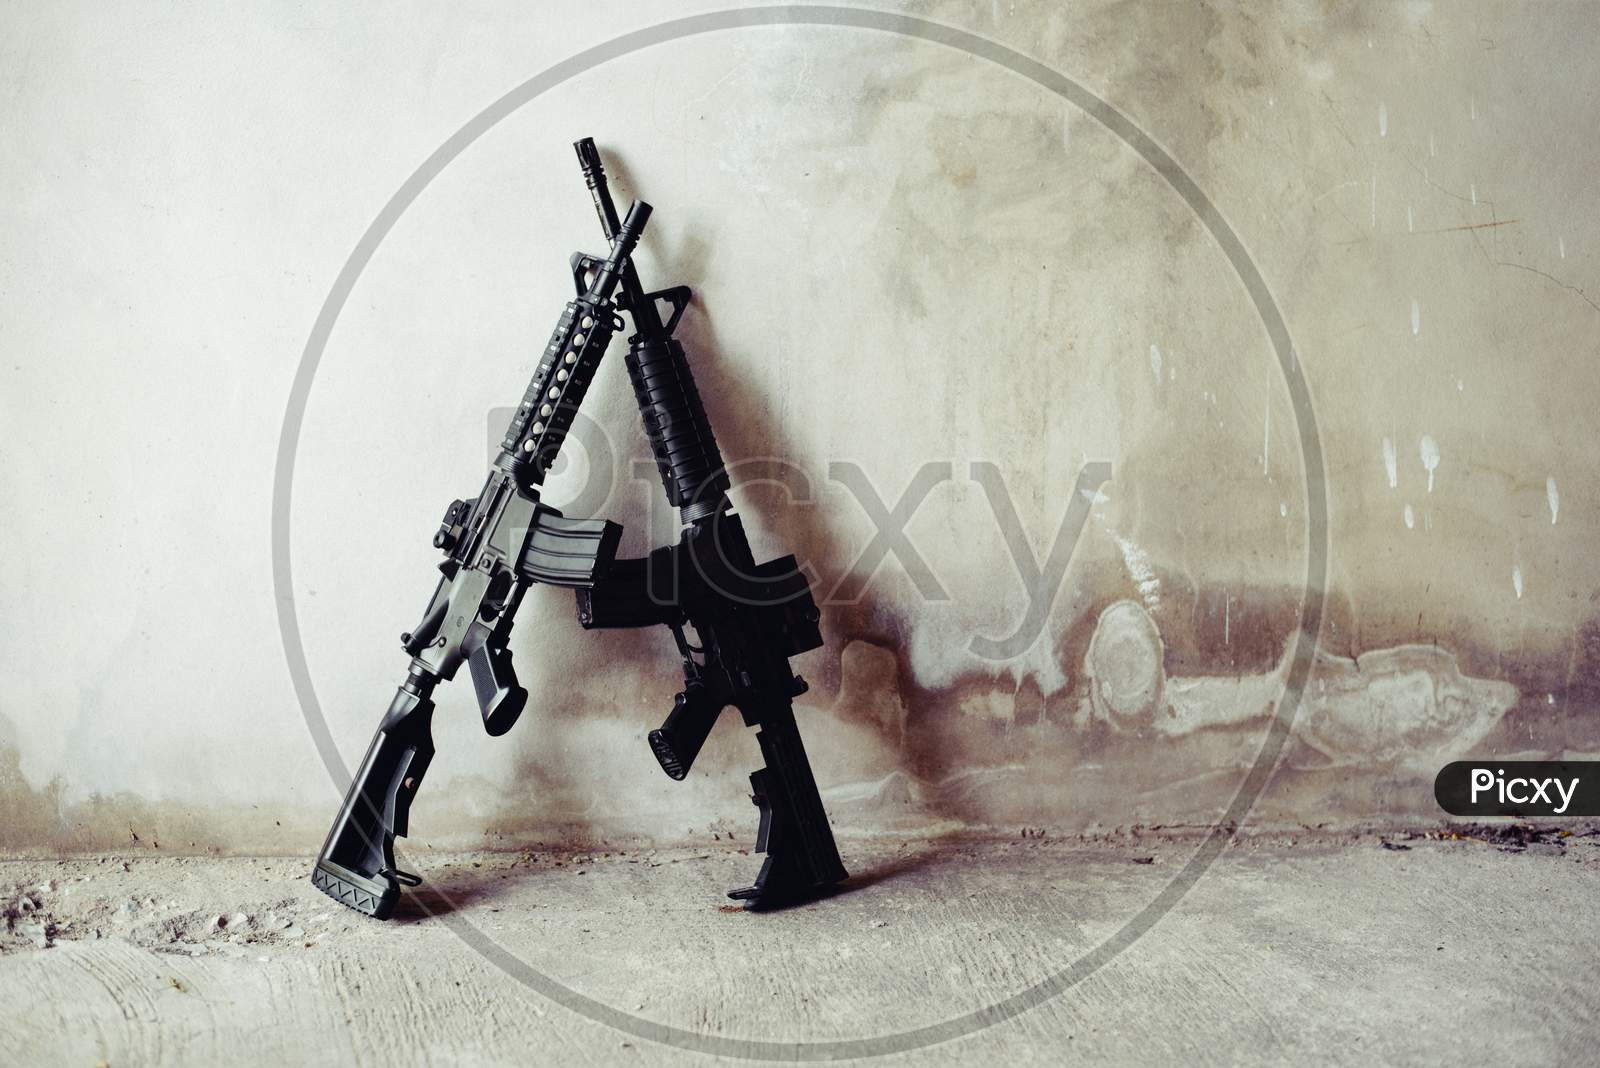 Rifle Guns On Grunge Wall In Abandoned House. Terrorist And Soldier Concept. Robber And Police Concept. War Machine Gun Theme.